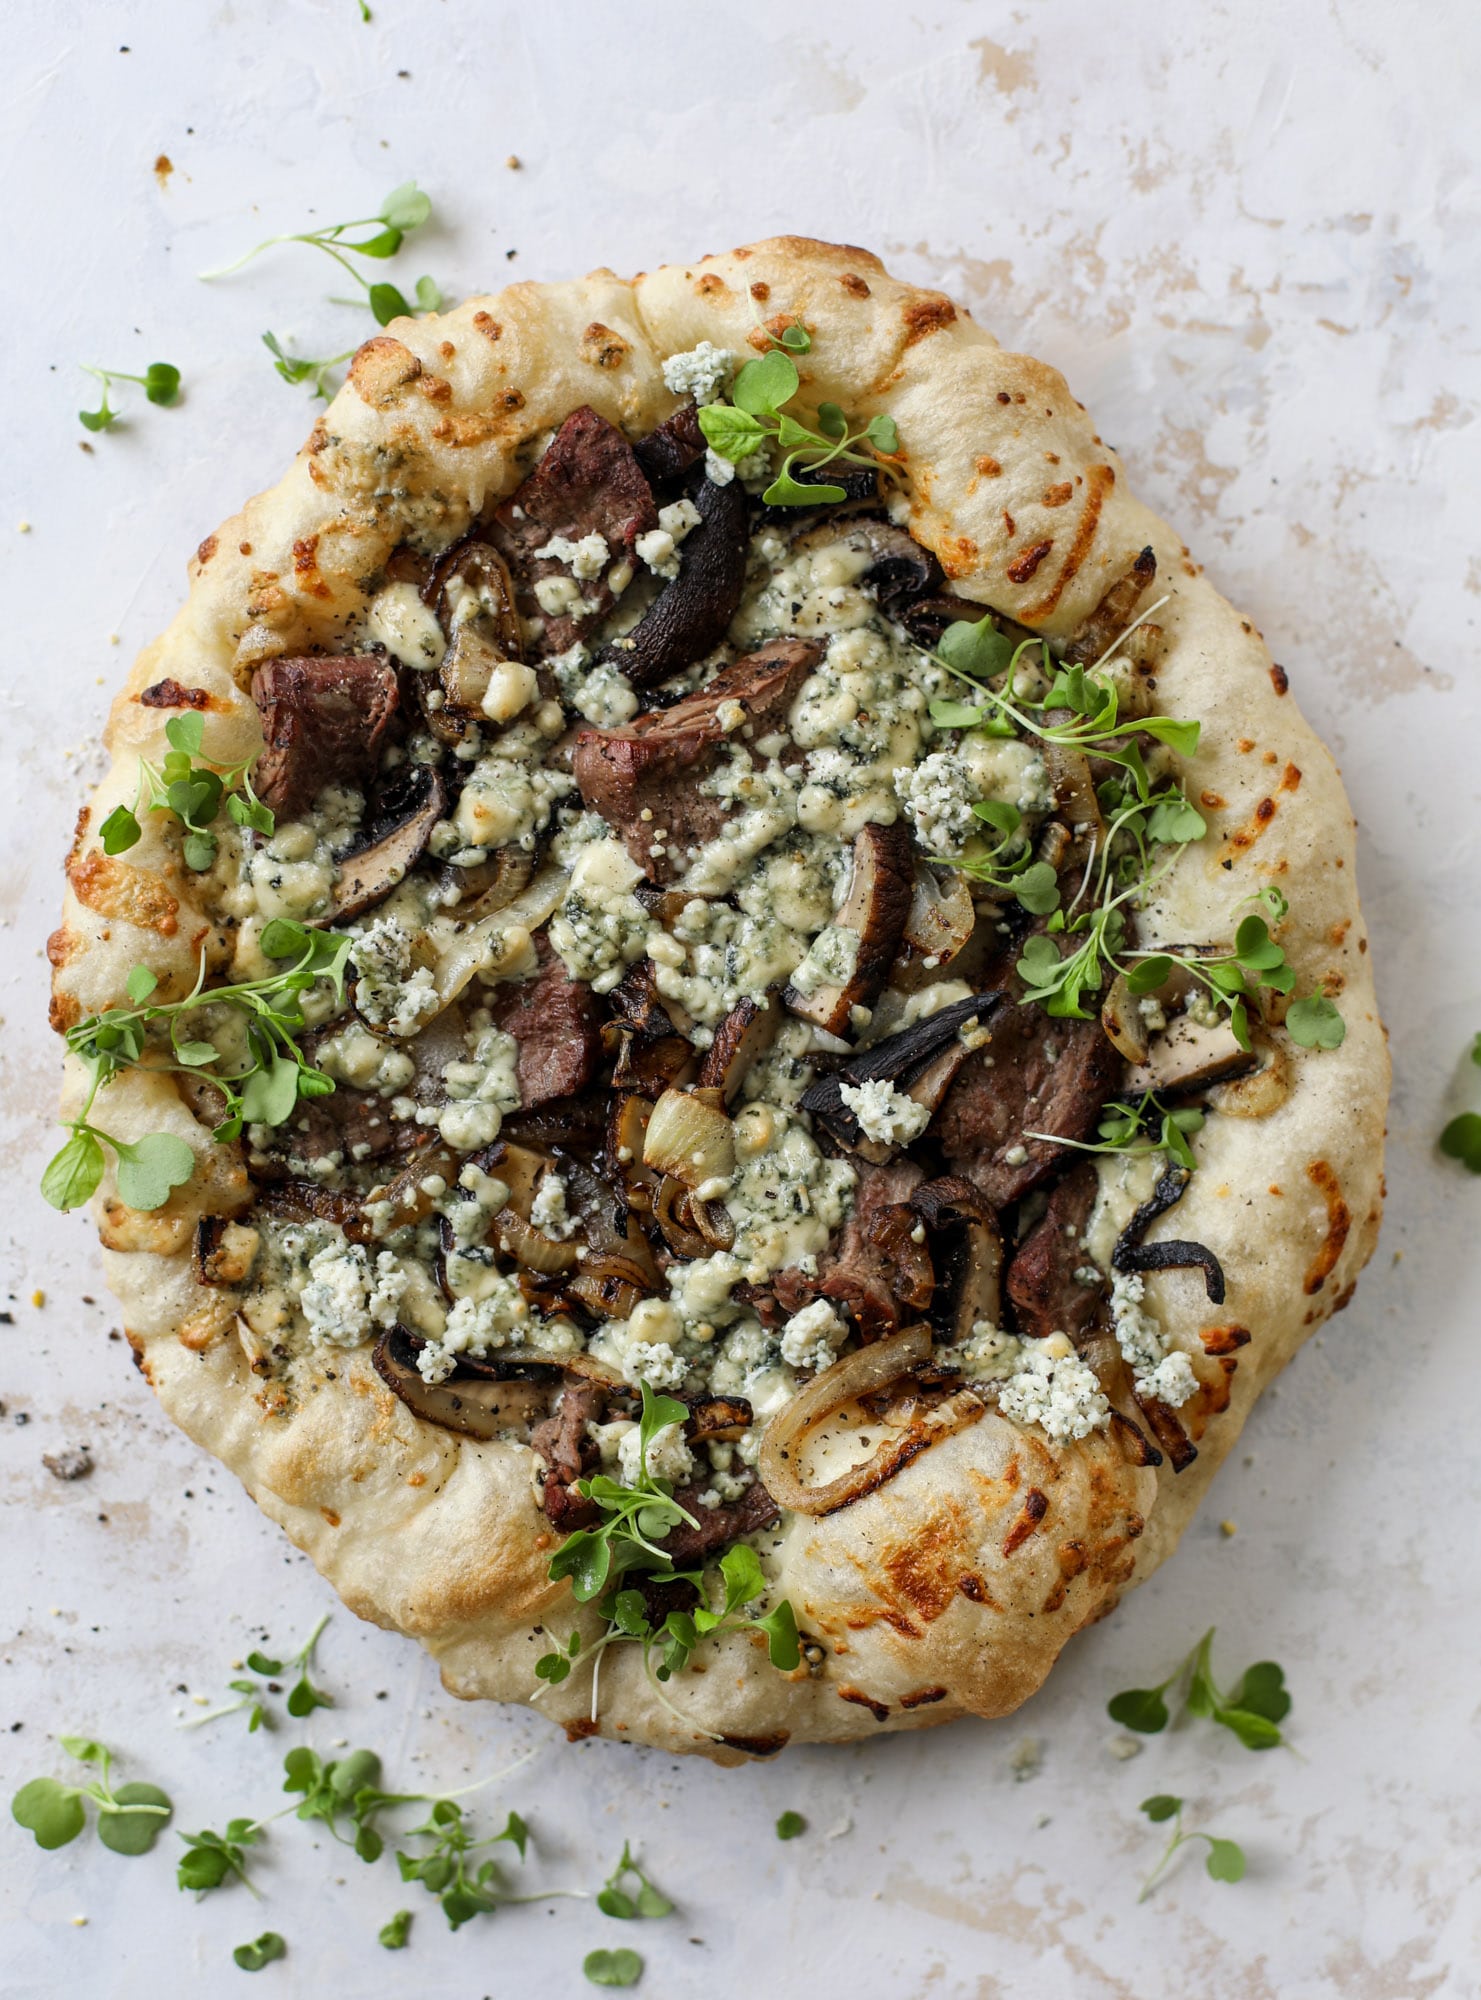 This grilled steakhouse pizza has all the amazing smoky flavors of your favorite steakhouse. Grilled onions, mushrooms and creamy gorgonzola finish it off.